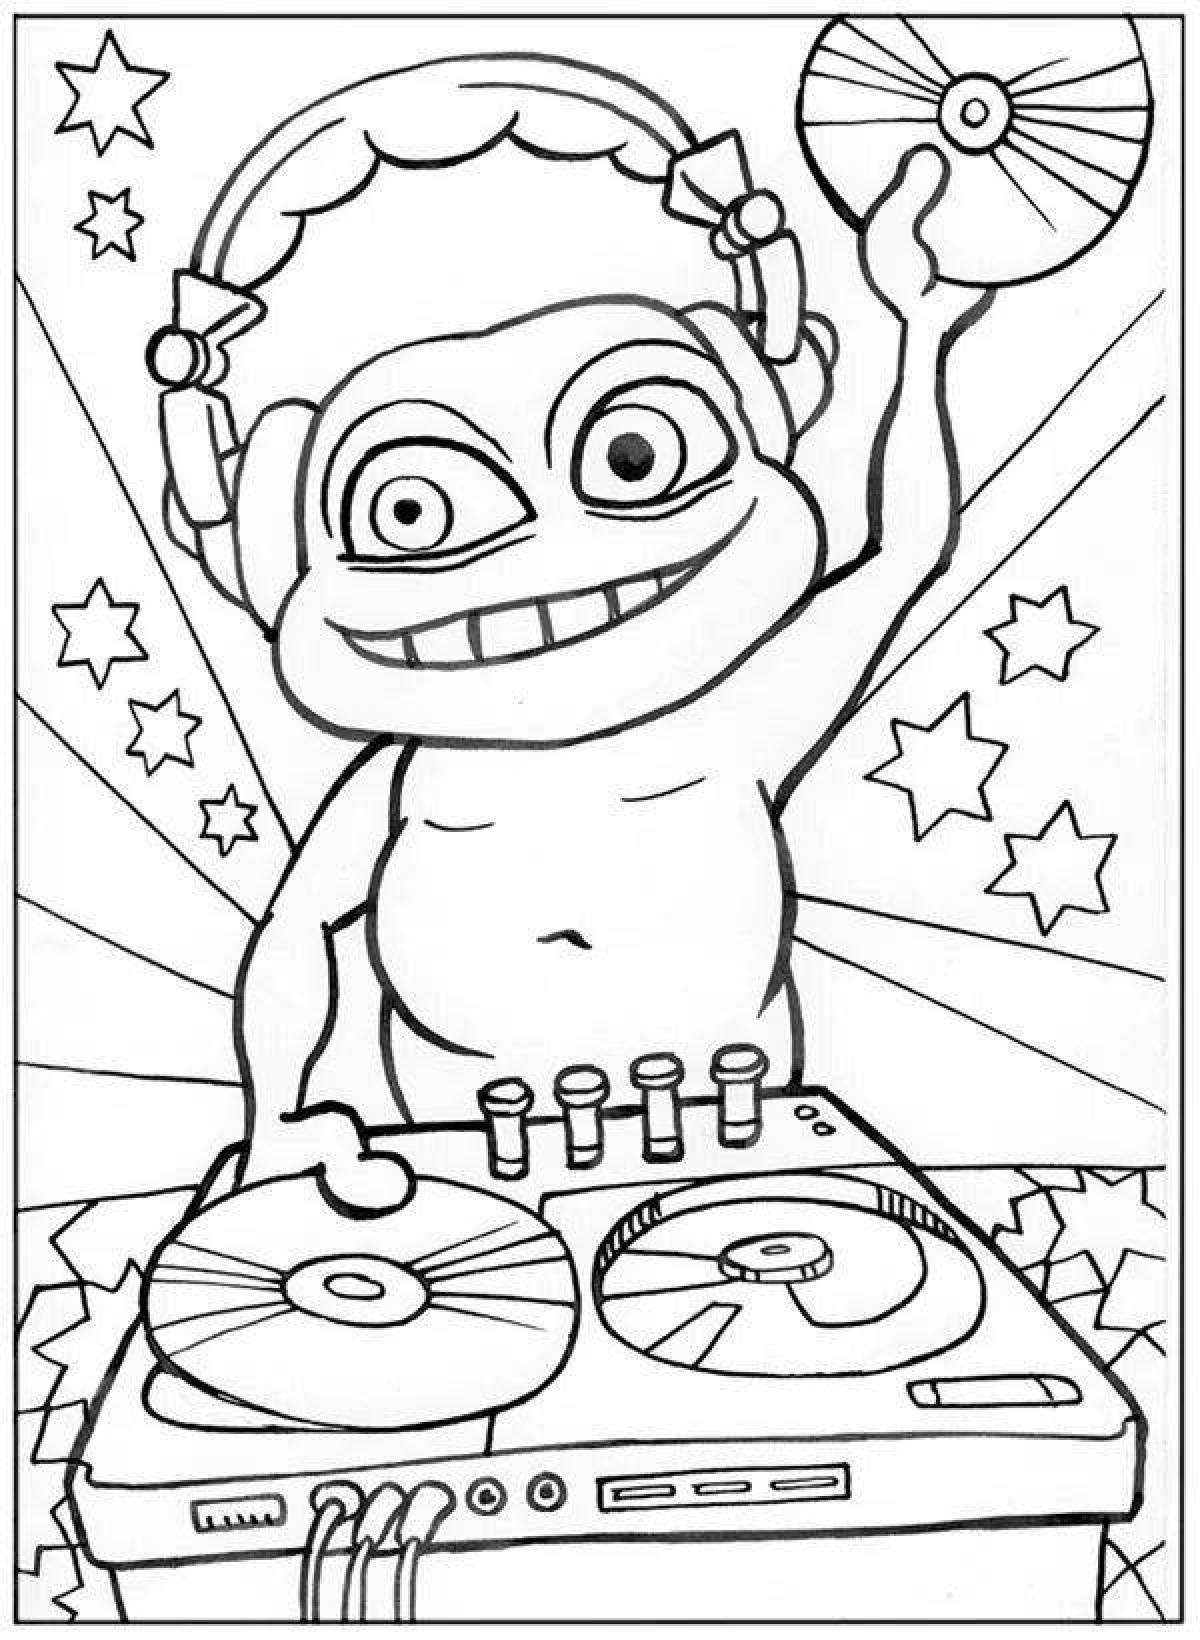 Fabulous crazy frog coloring page